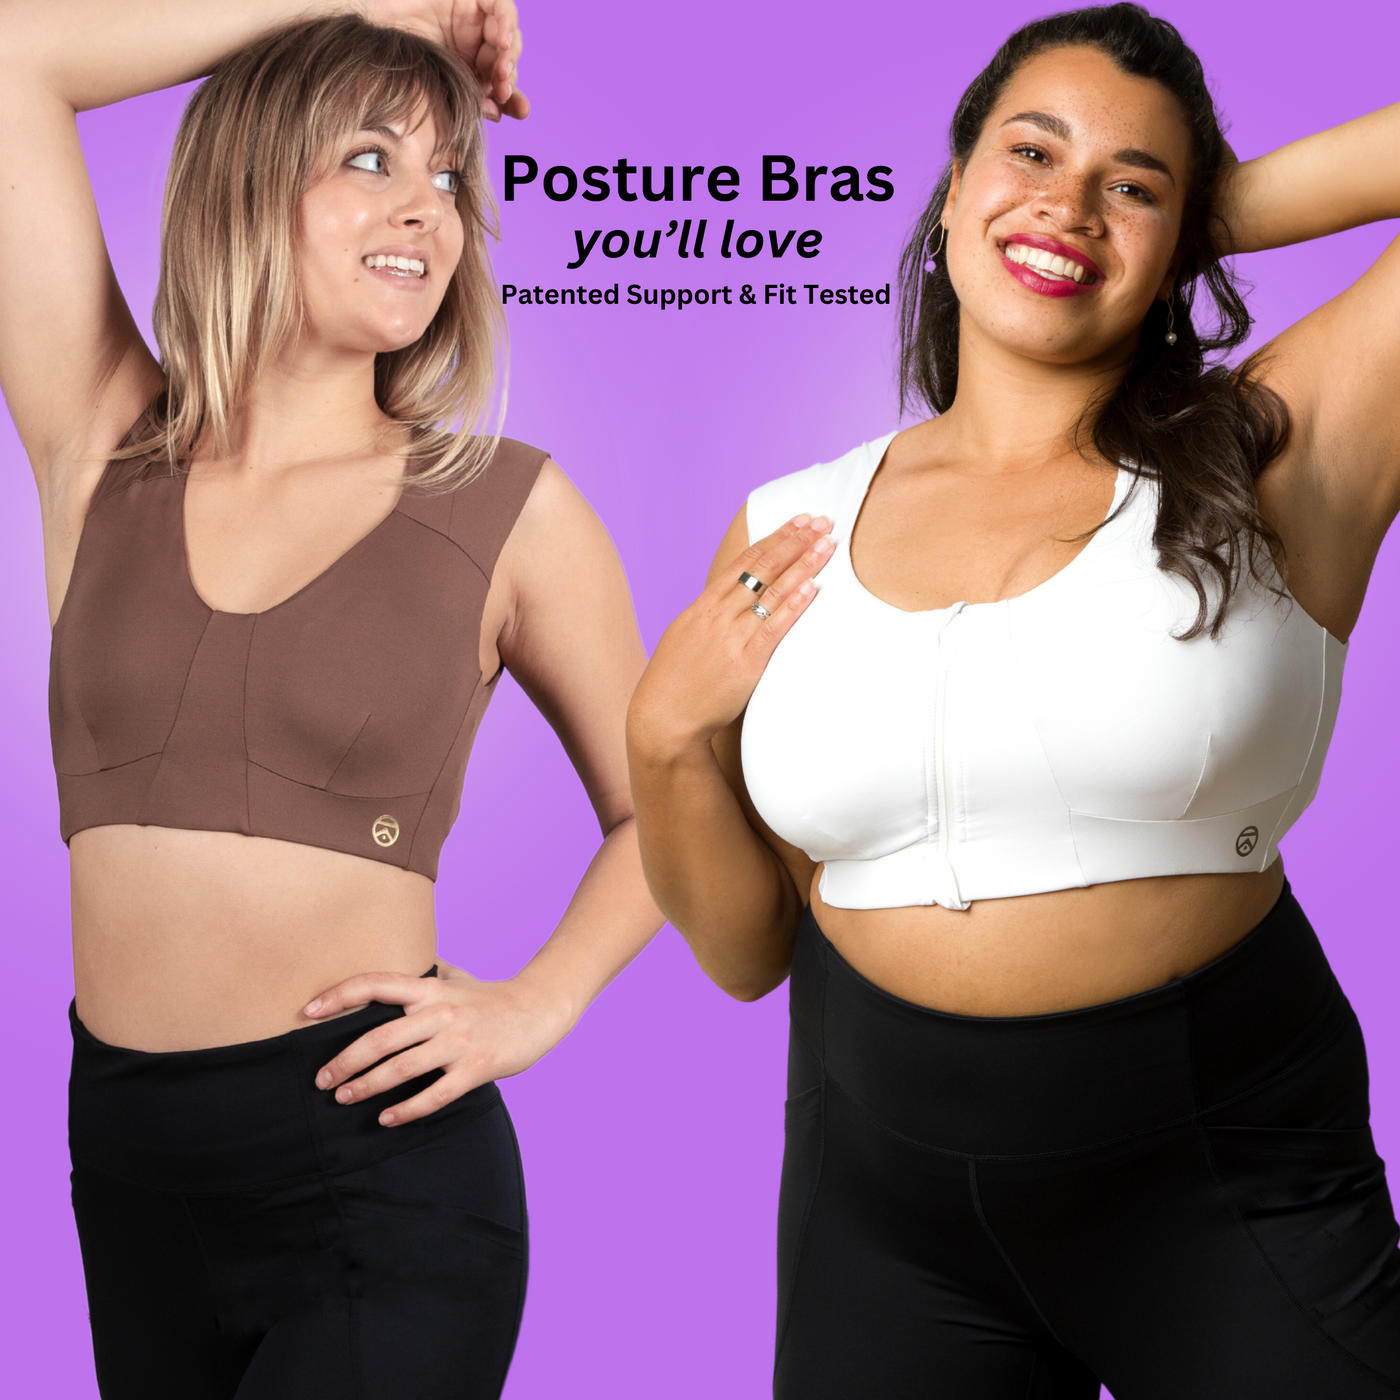 Most inclusive posture bras with sizes XS to 7XL.  Kinflyte's line of patented posture bras are posture corrector sports bra. Comfortable posture corrector bras deliver shoulder support, back support, targeted compression